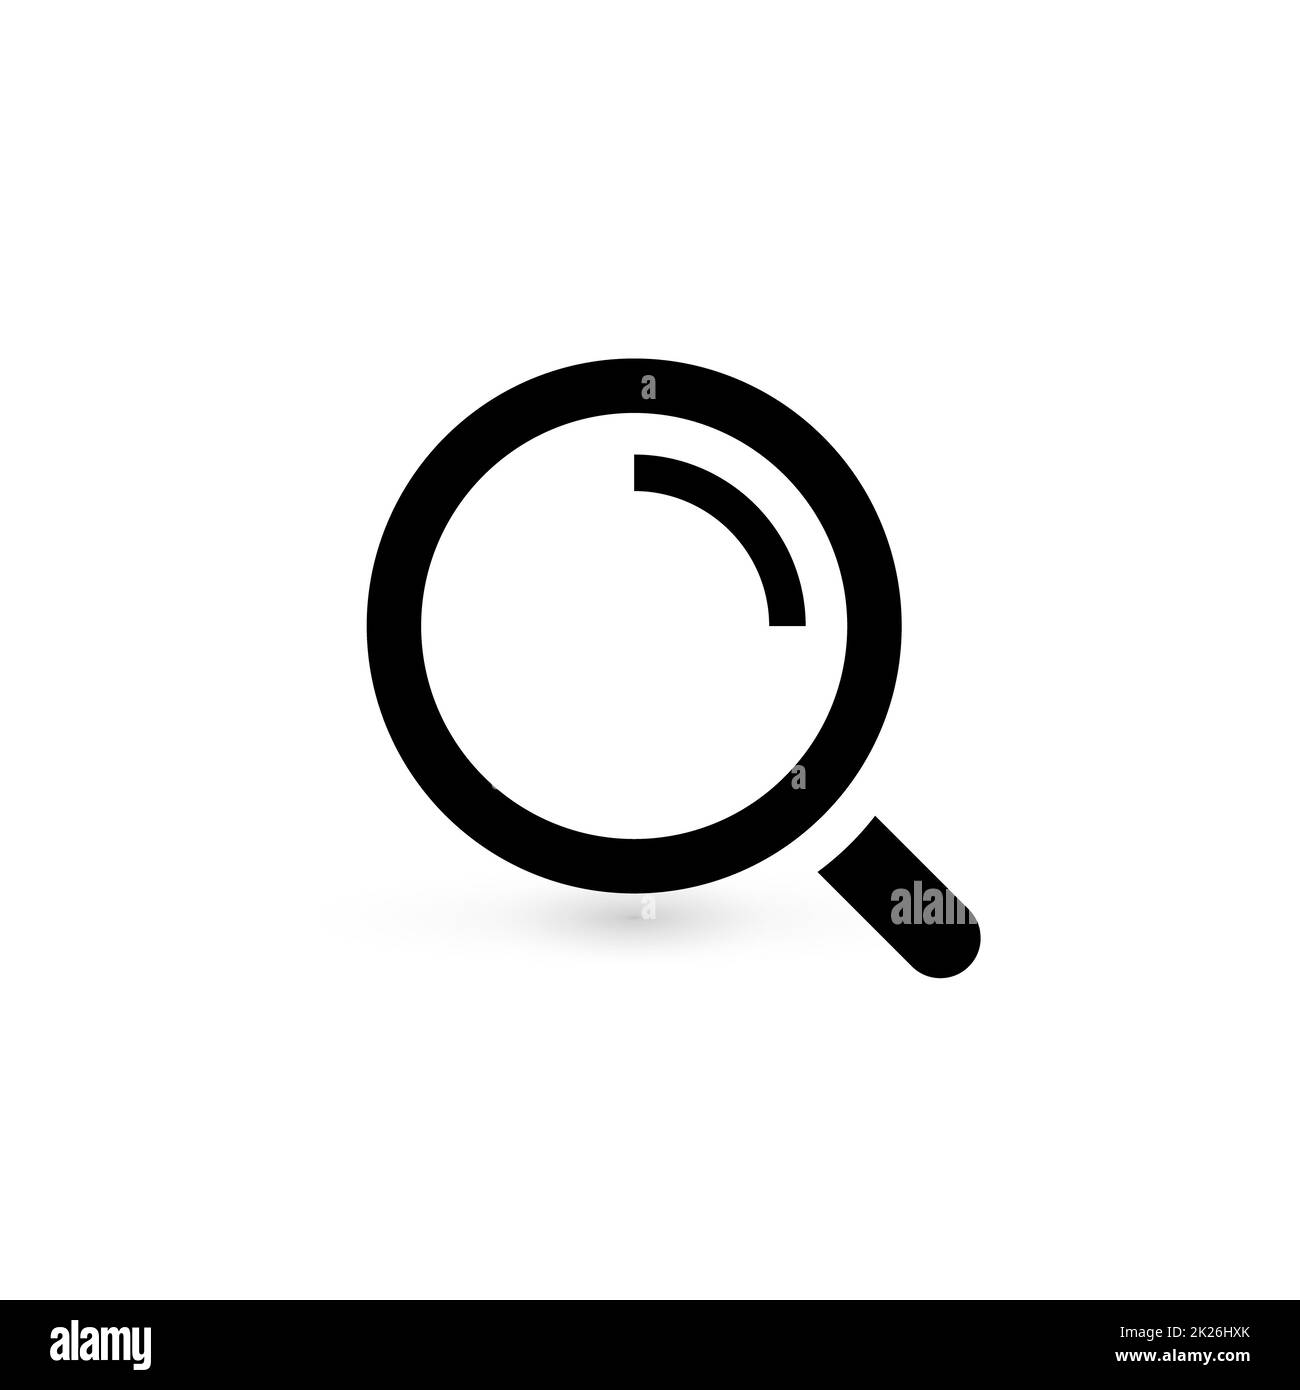 Search icon, SEO of big data symbol, web navigation sign, line style simple magnifier graphic element, magnifying glass logo template, isolated vector illustration. Stock Photo